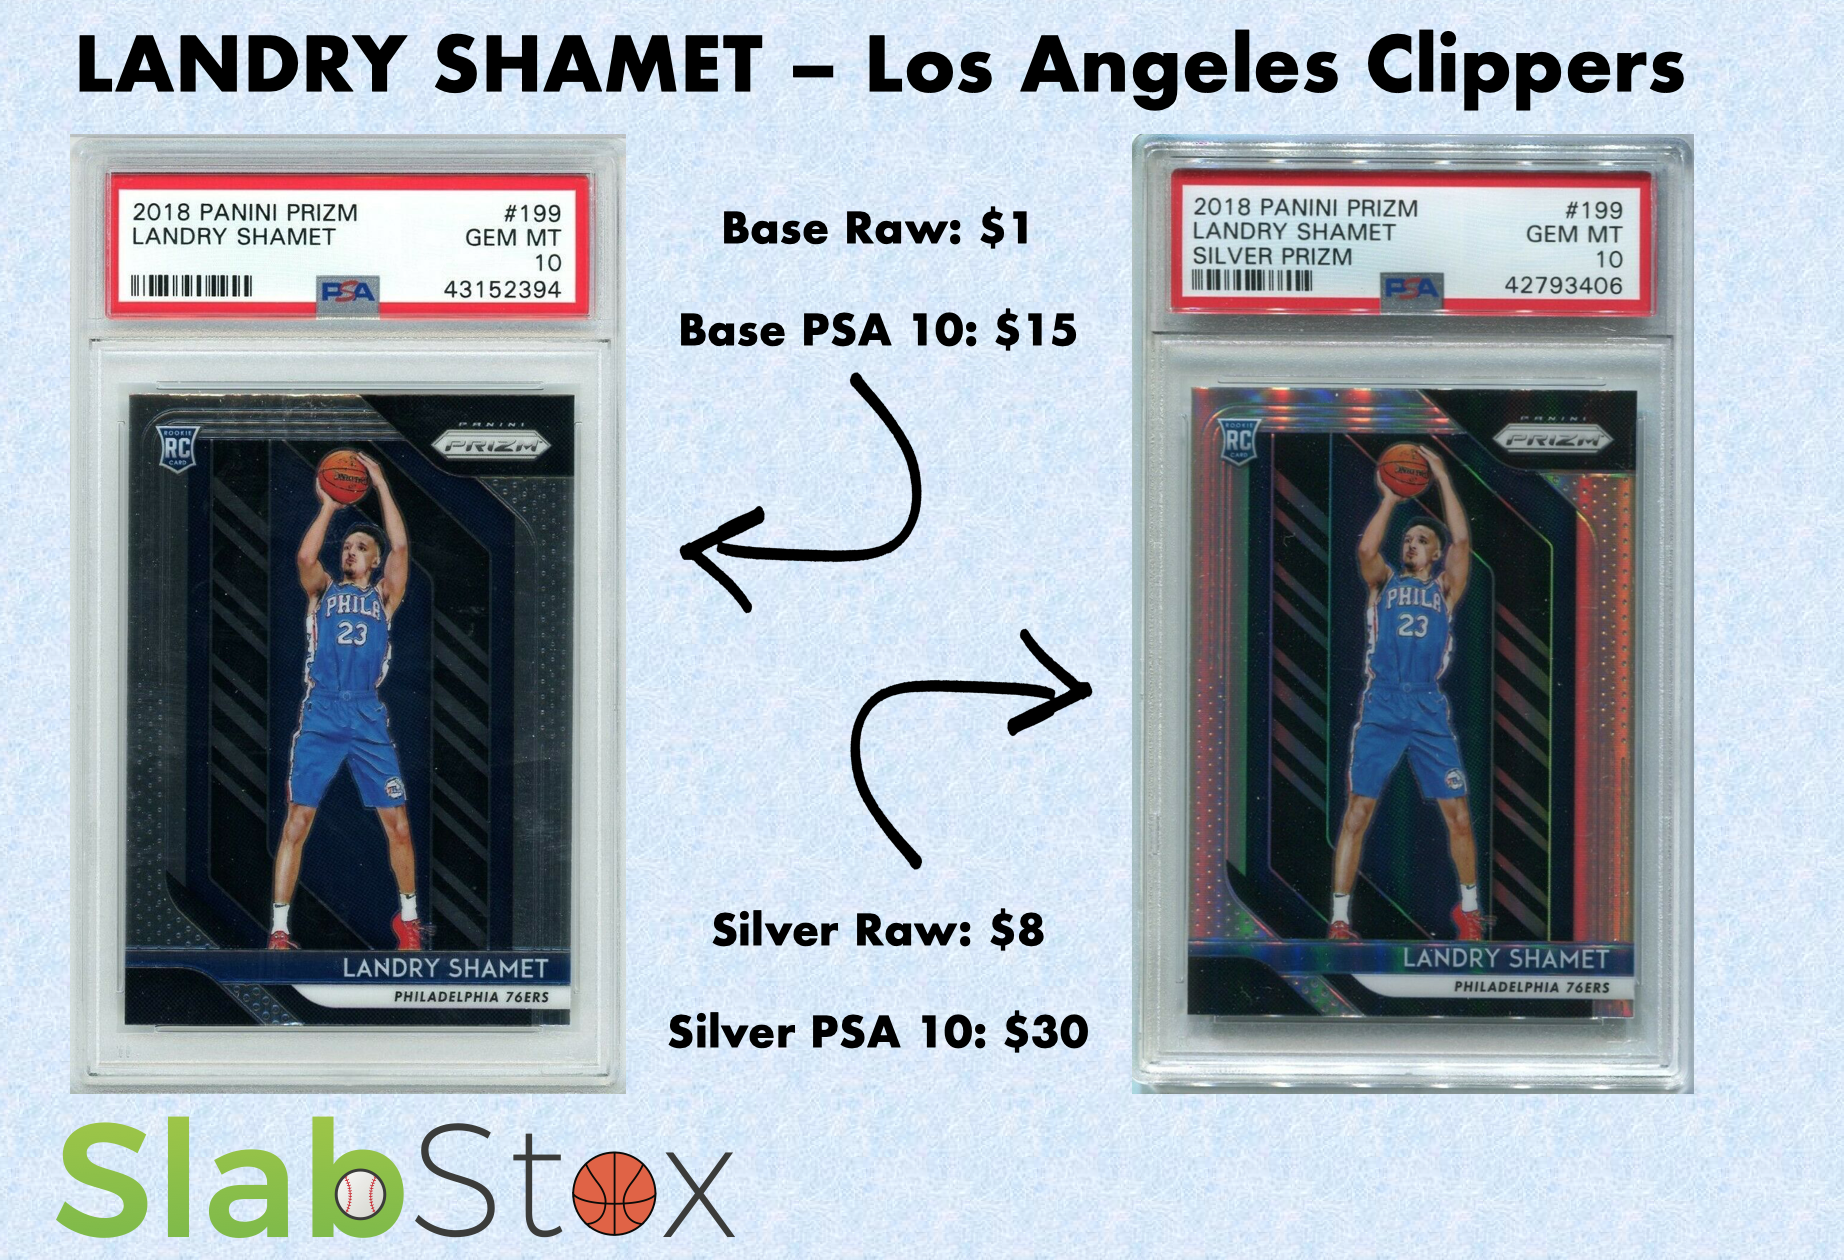 Graphic image of sports cards of Landry Shamet of the Los Angeles Clippers with the SlabStox logo underneath